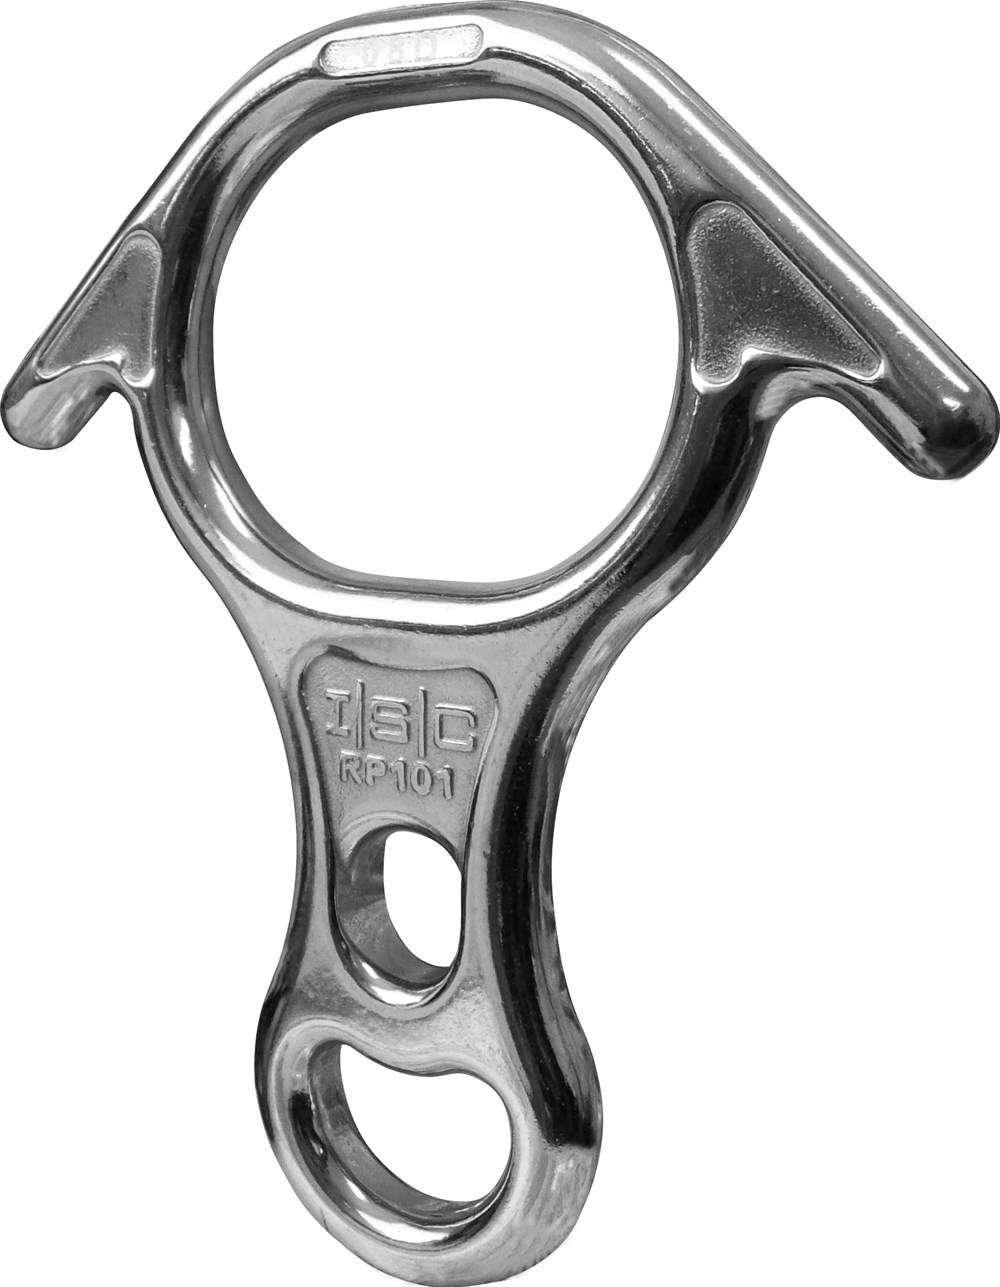 ISC Rescue Figure 8 Descender (Stainless)